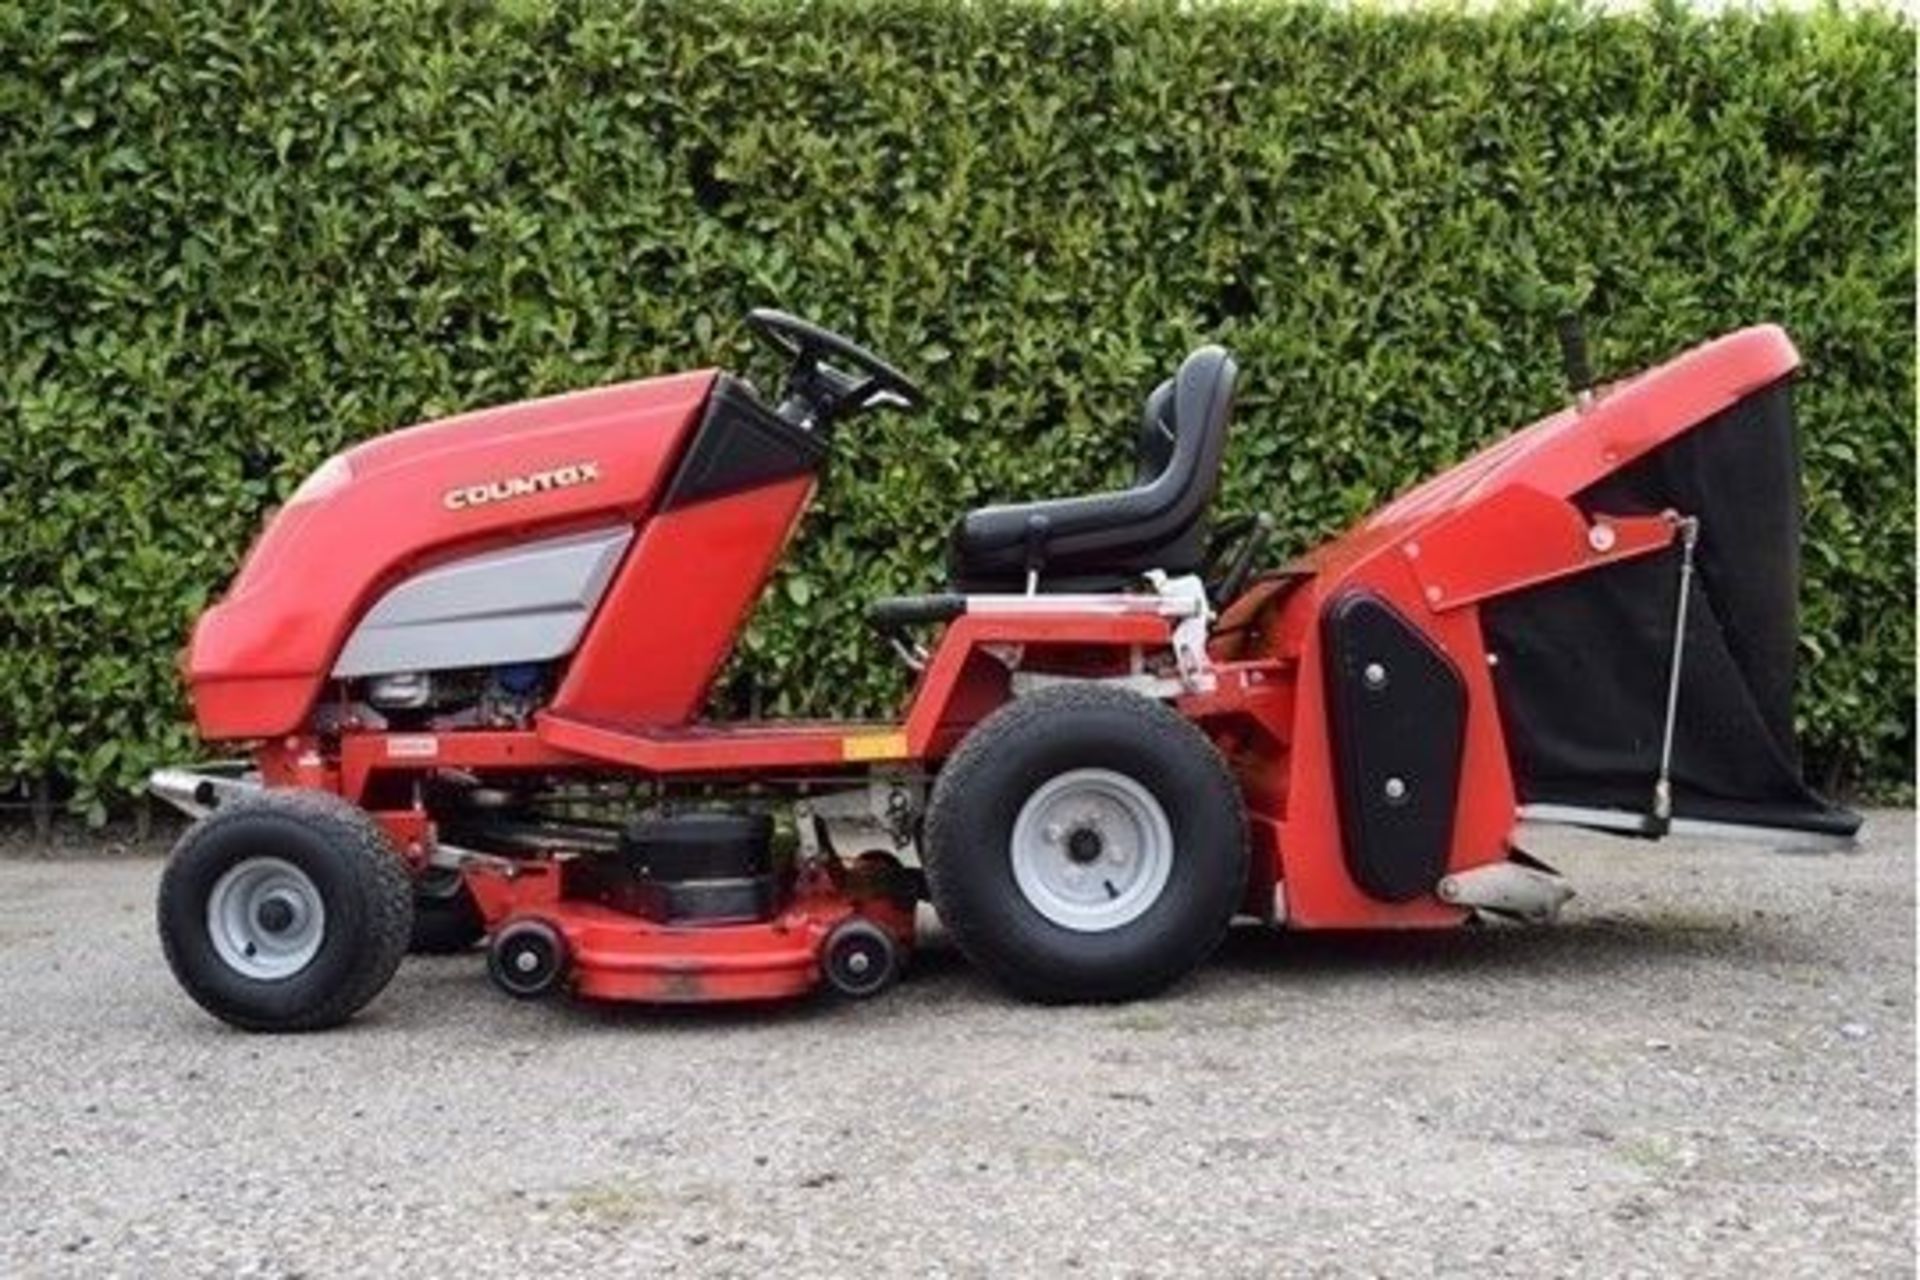 Countax C800H 44" Rear Discharge Garden Tractor With PGC.